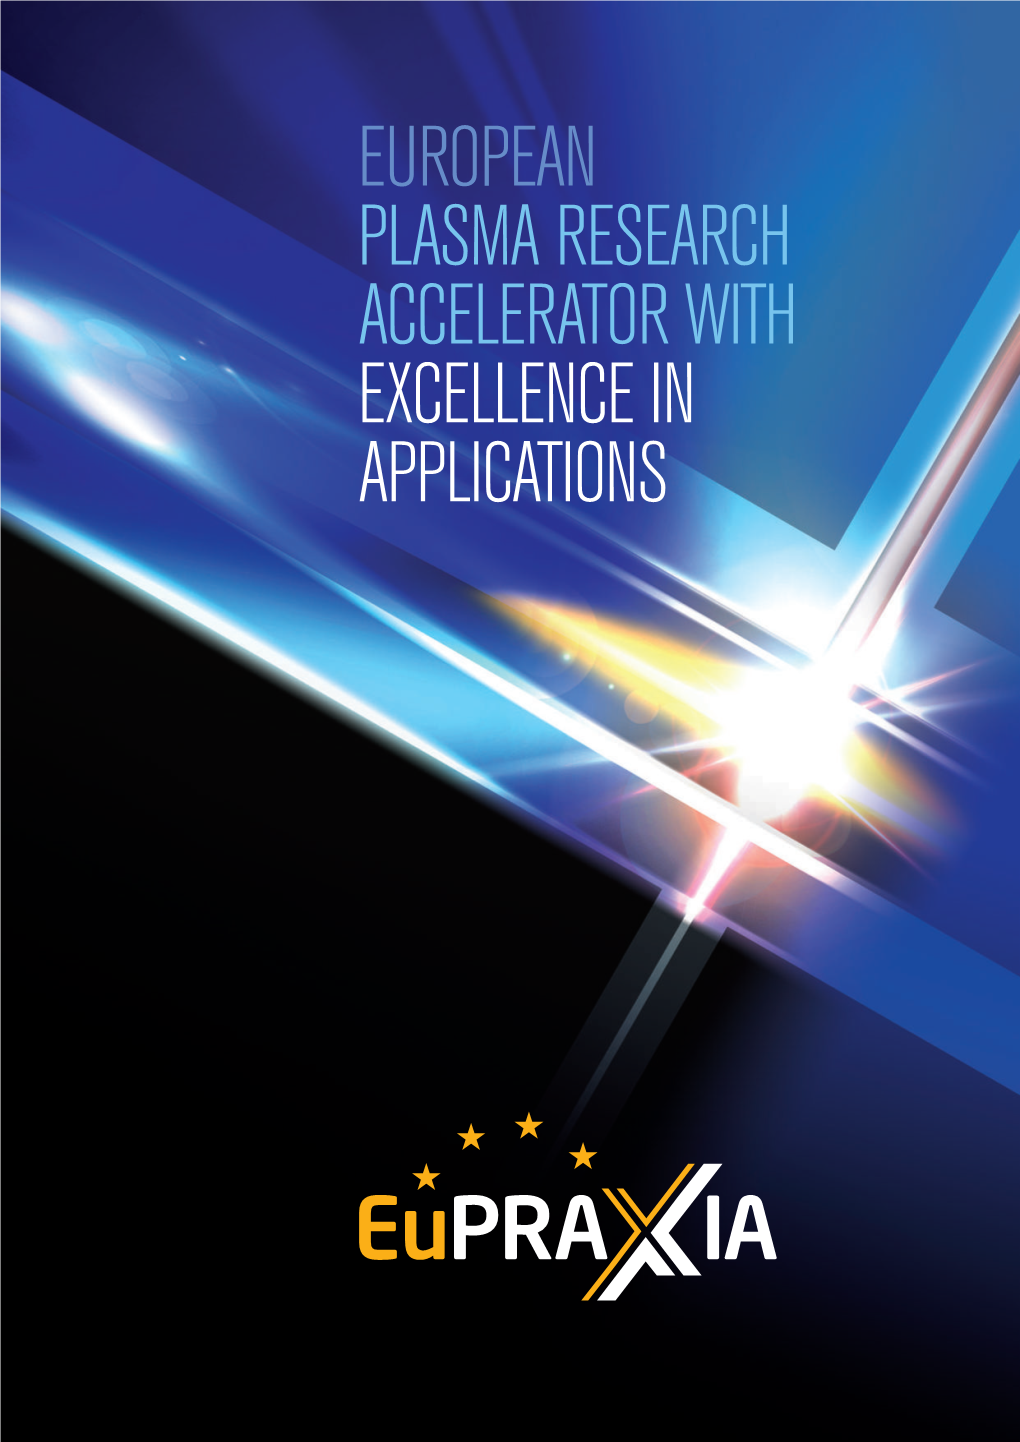 European Plasma Research Accelerator with Excellence in Applications Contents